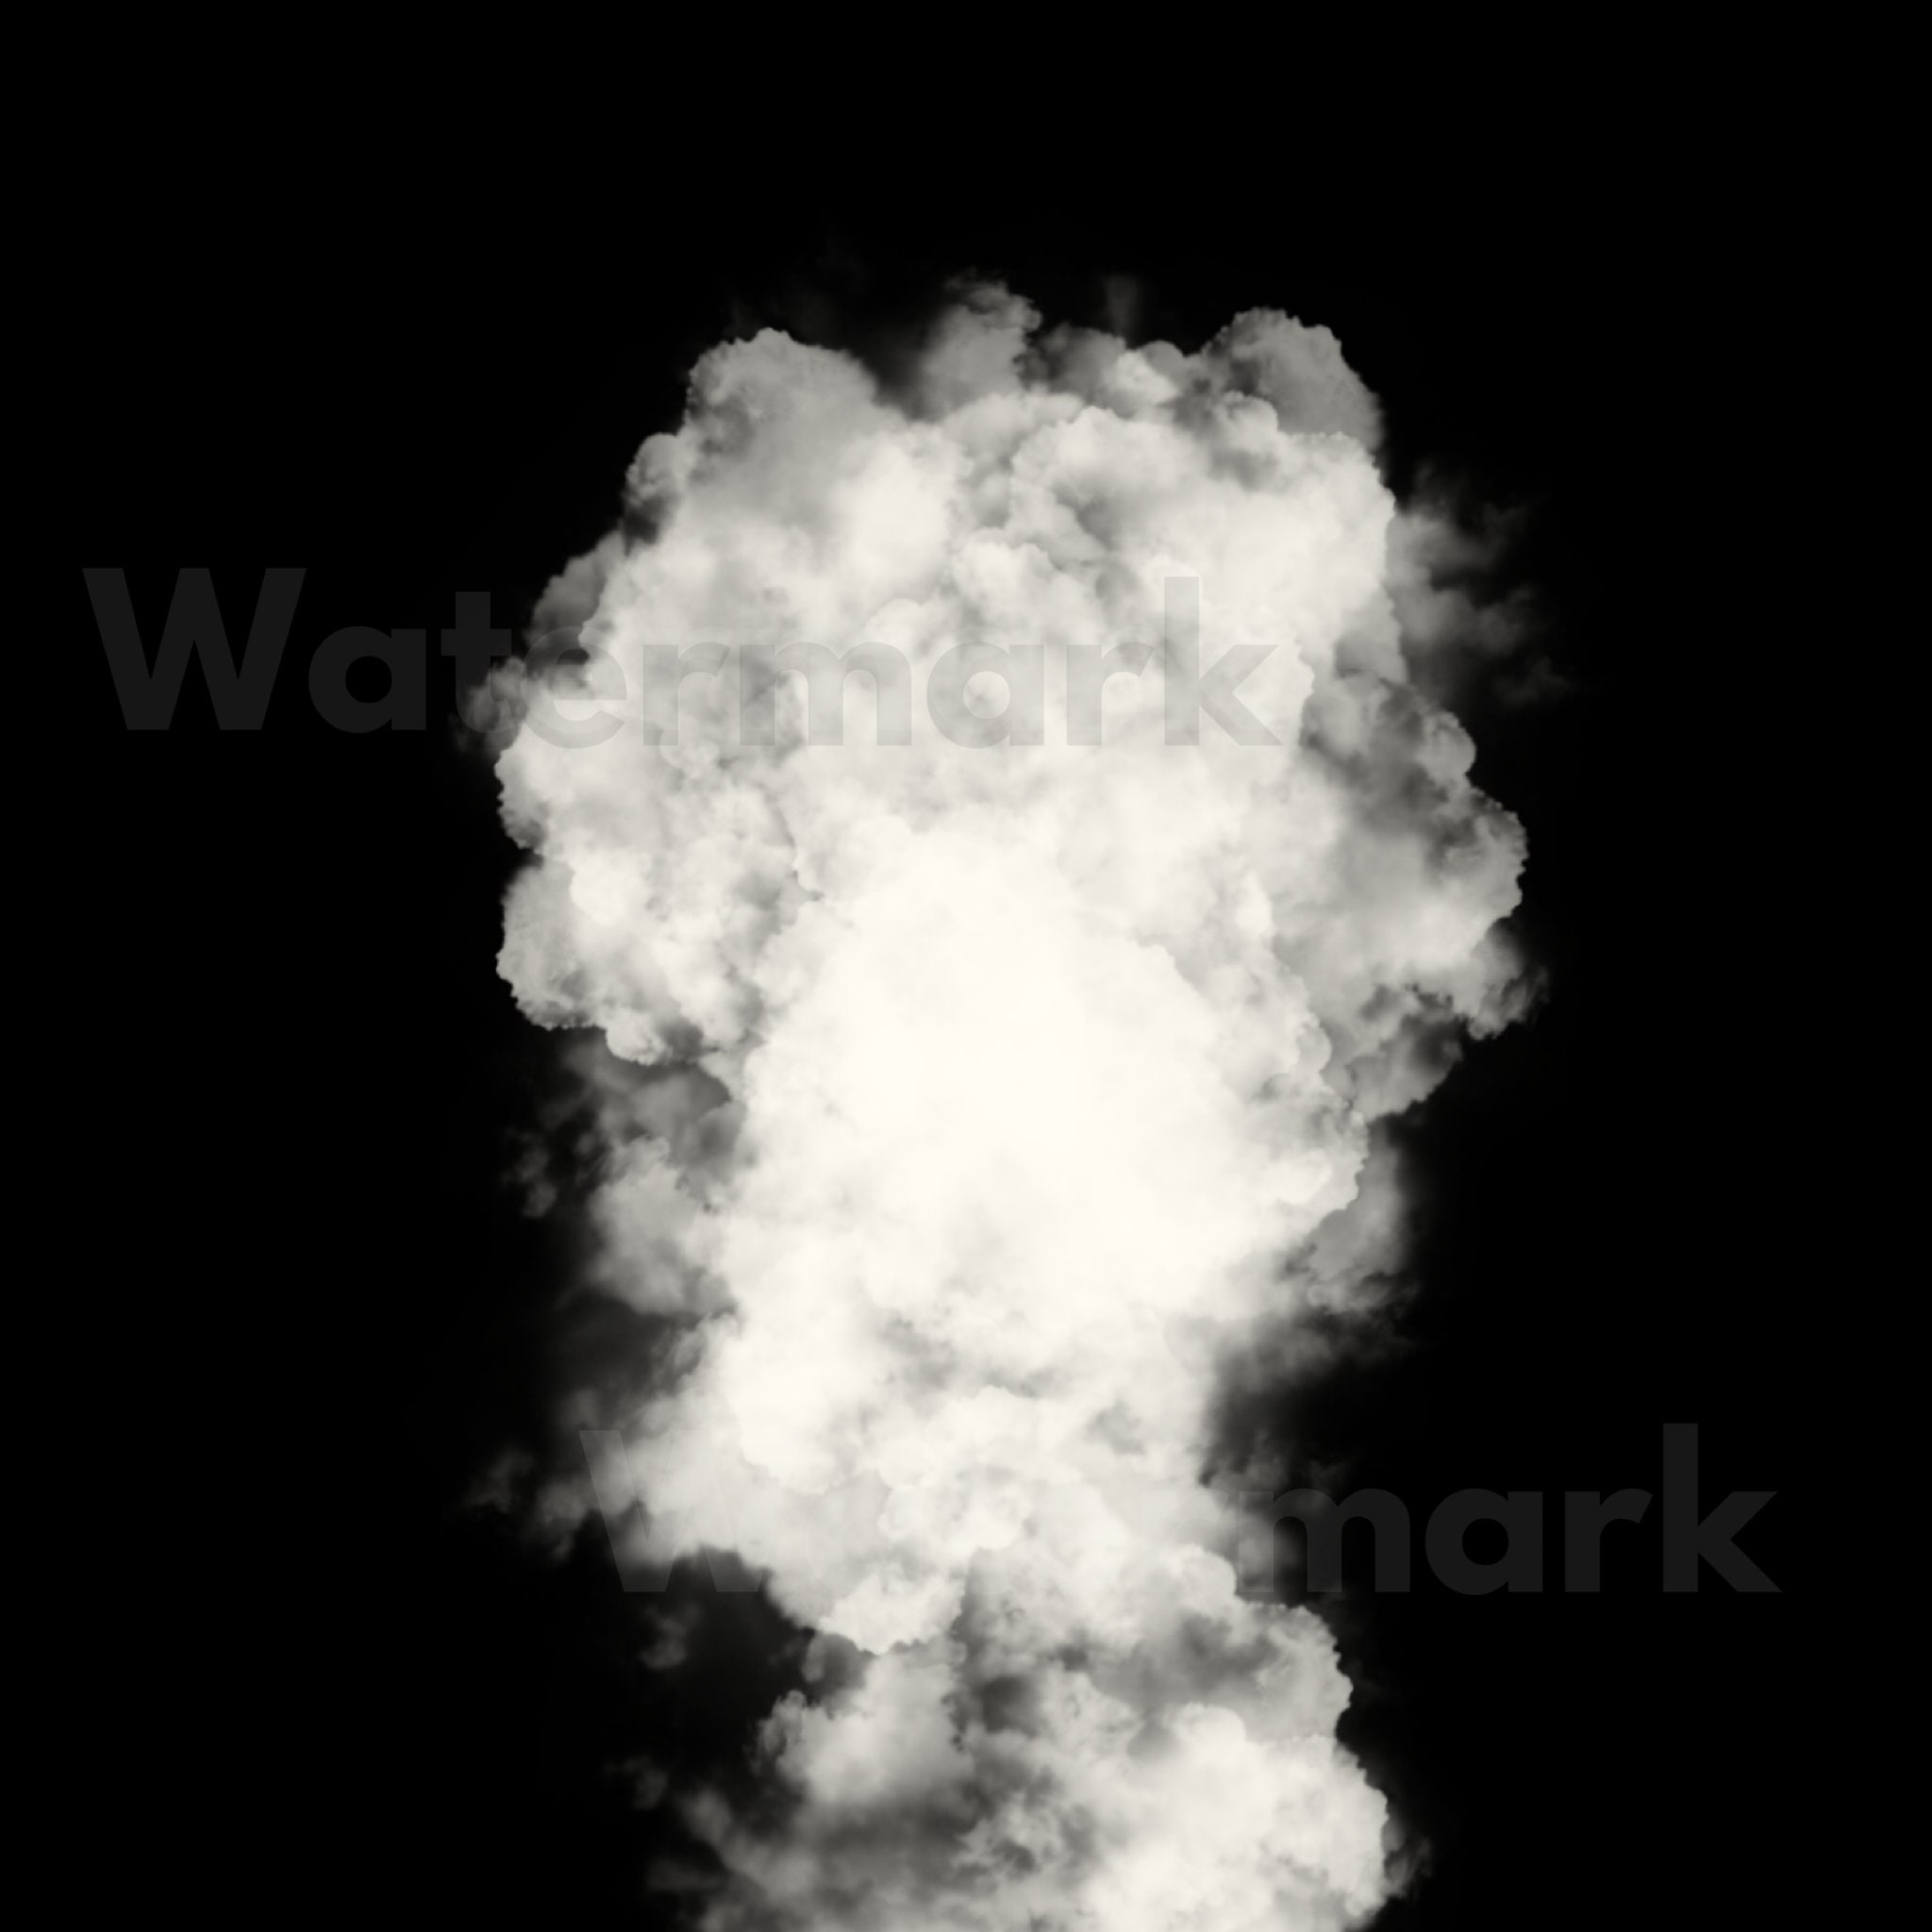 White Smoke Cloud Overlay Bundle, Transparent Background, Banners